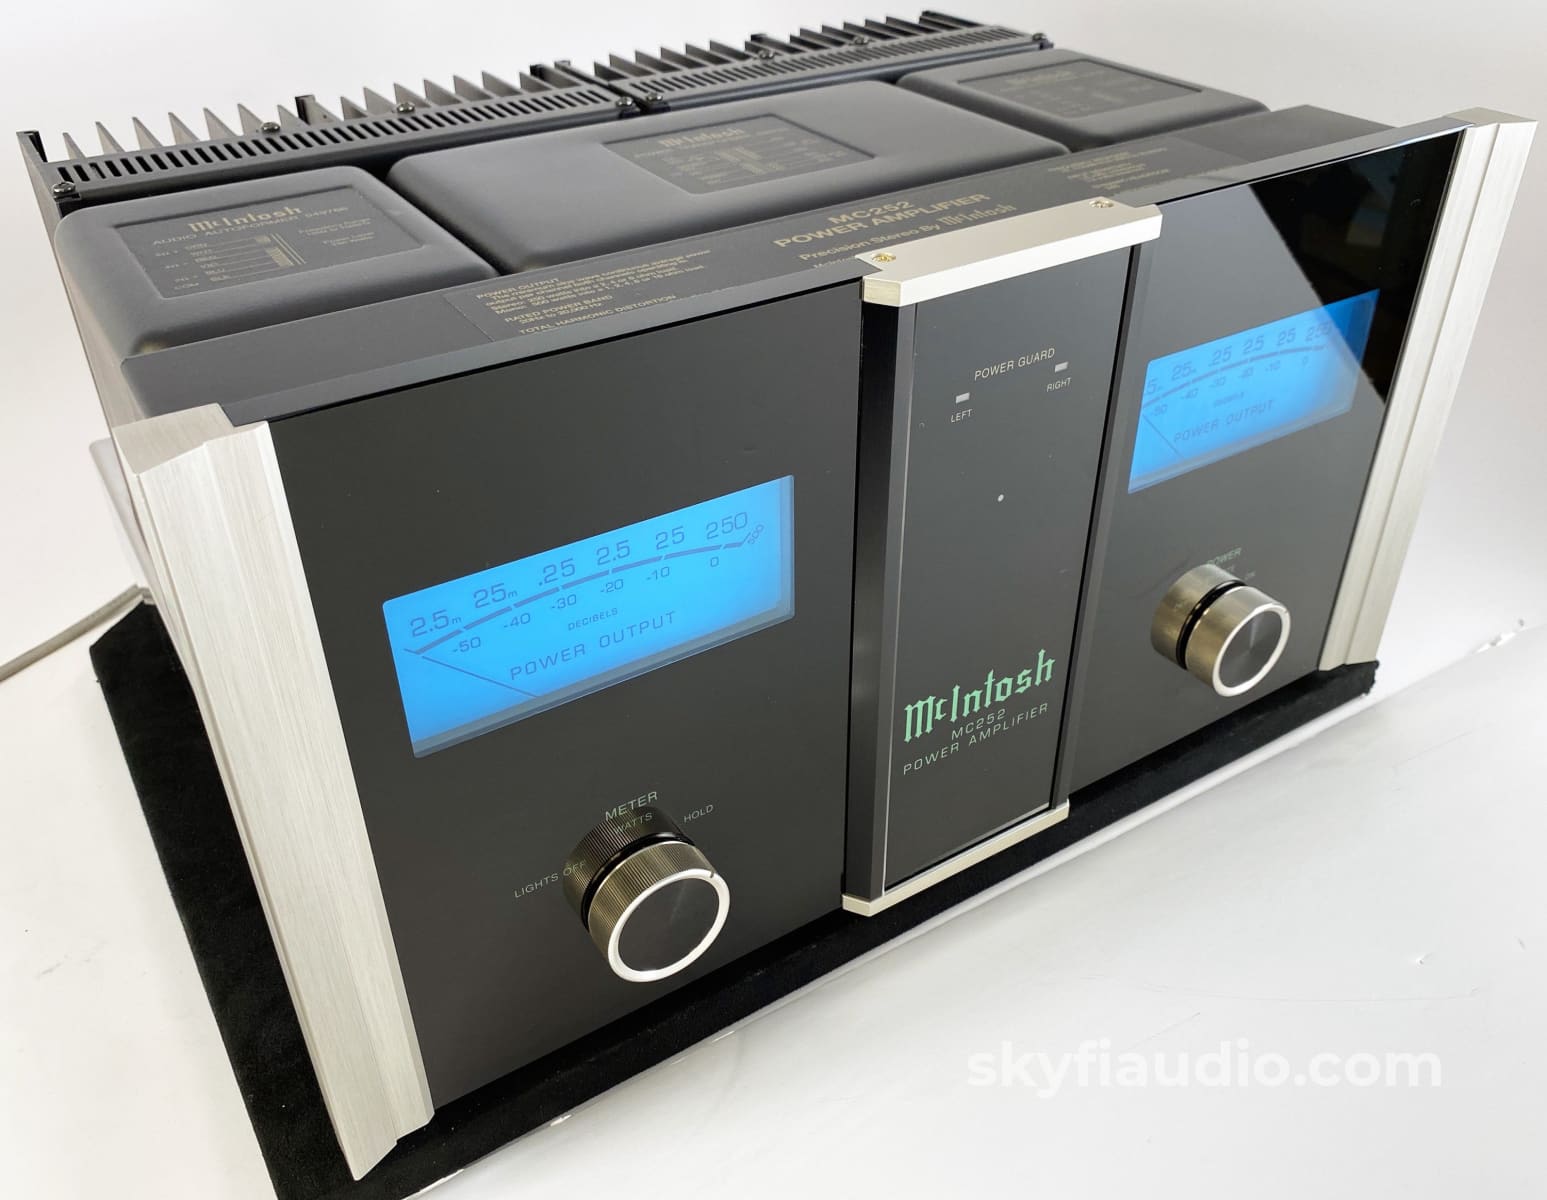 Mcintosh Mc252 Solid State Amplifier With 250Wpc